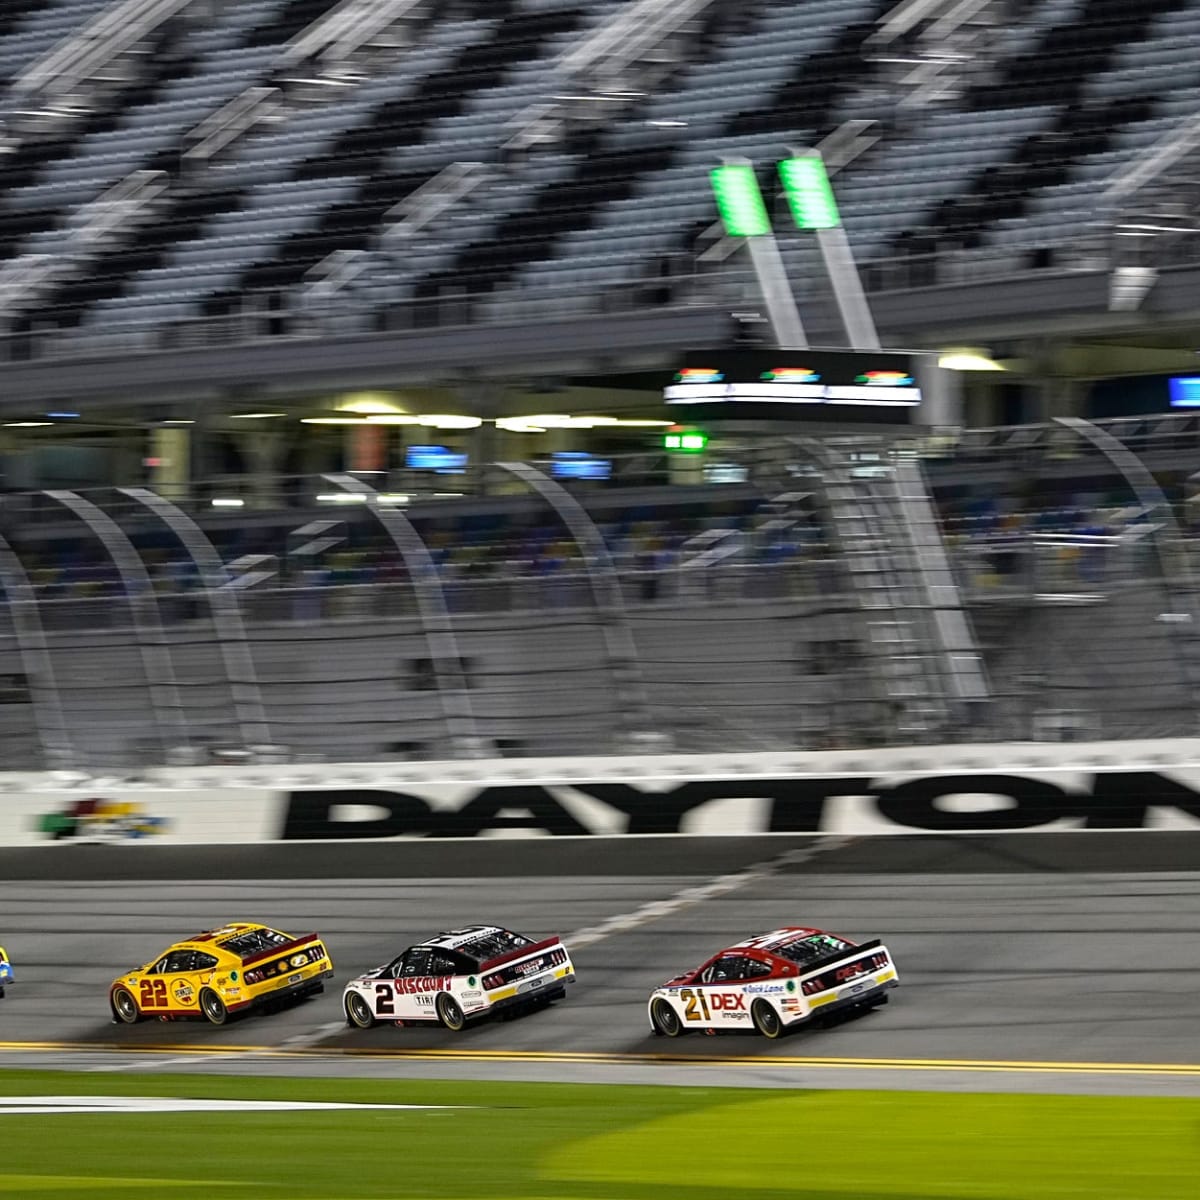 Bluegreen Vacations Duel 2 At DAYTONA Live Stream, TV Channel, Start Time - How to Watch and Stream Major League and College Sports